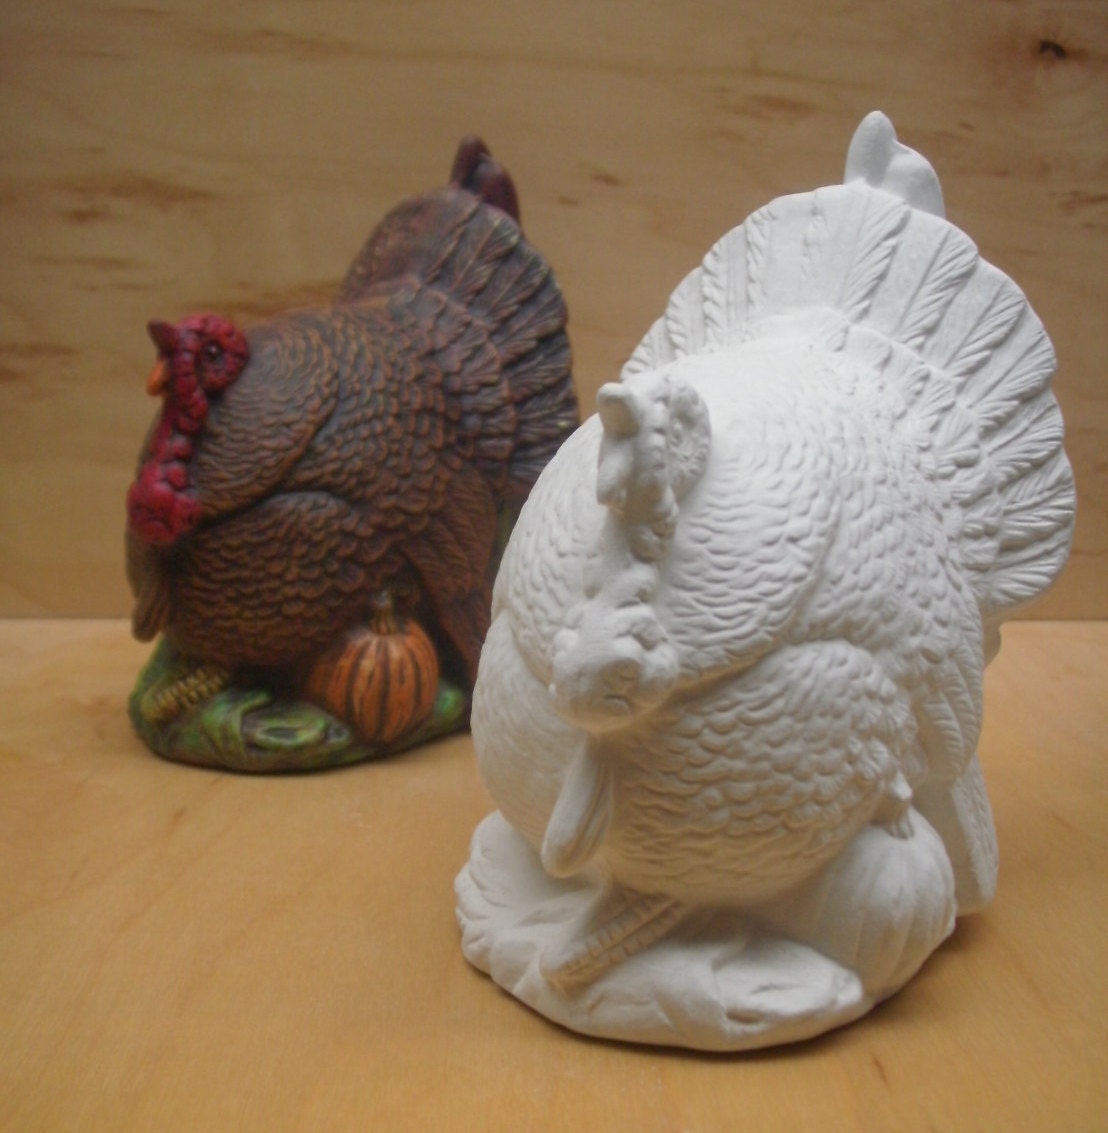  Ceramic  ready to paint unpainted  ceramic  bisque  Turkey Fall